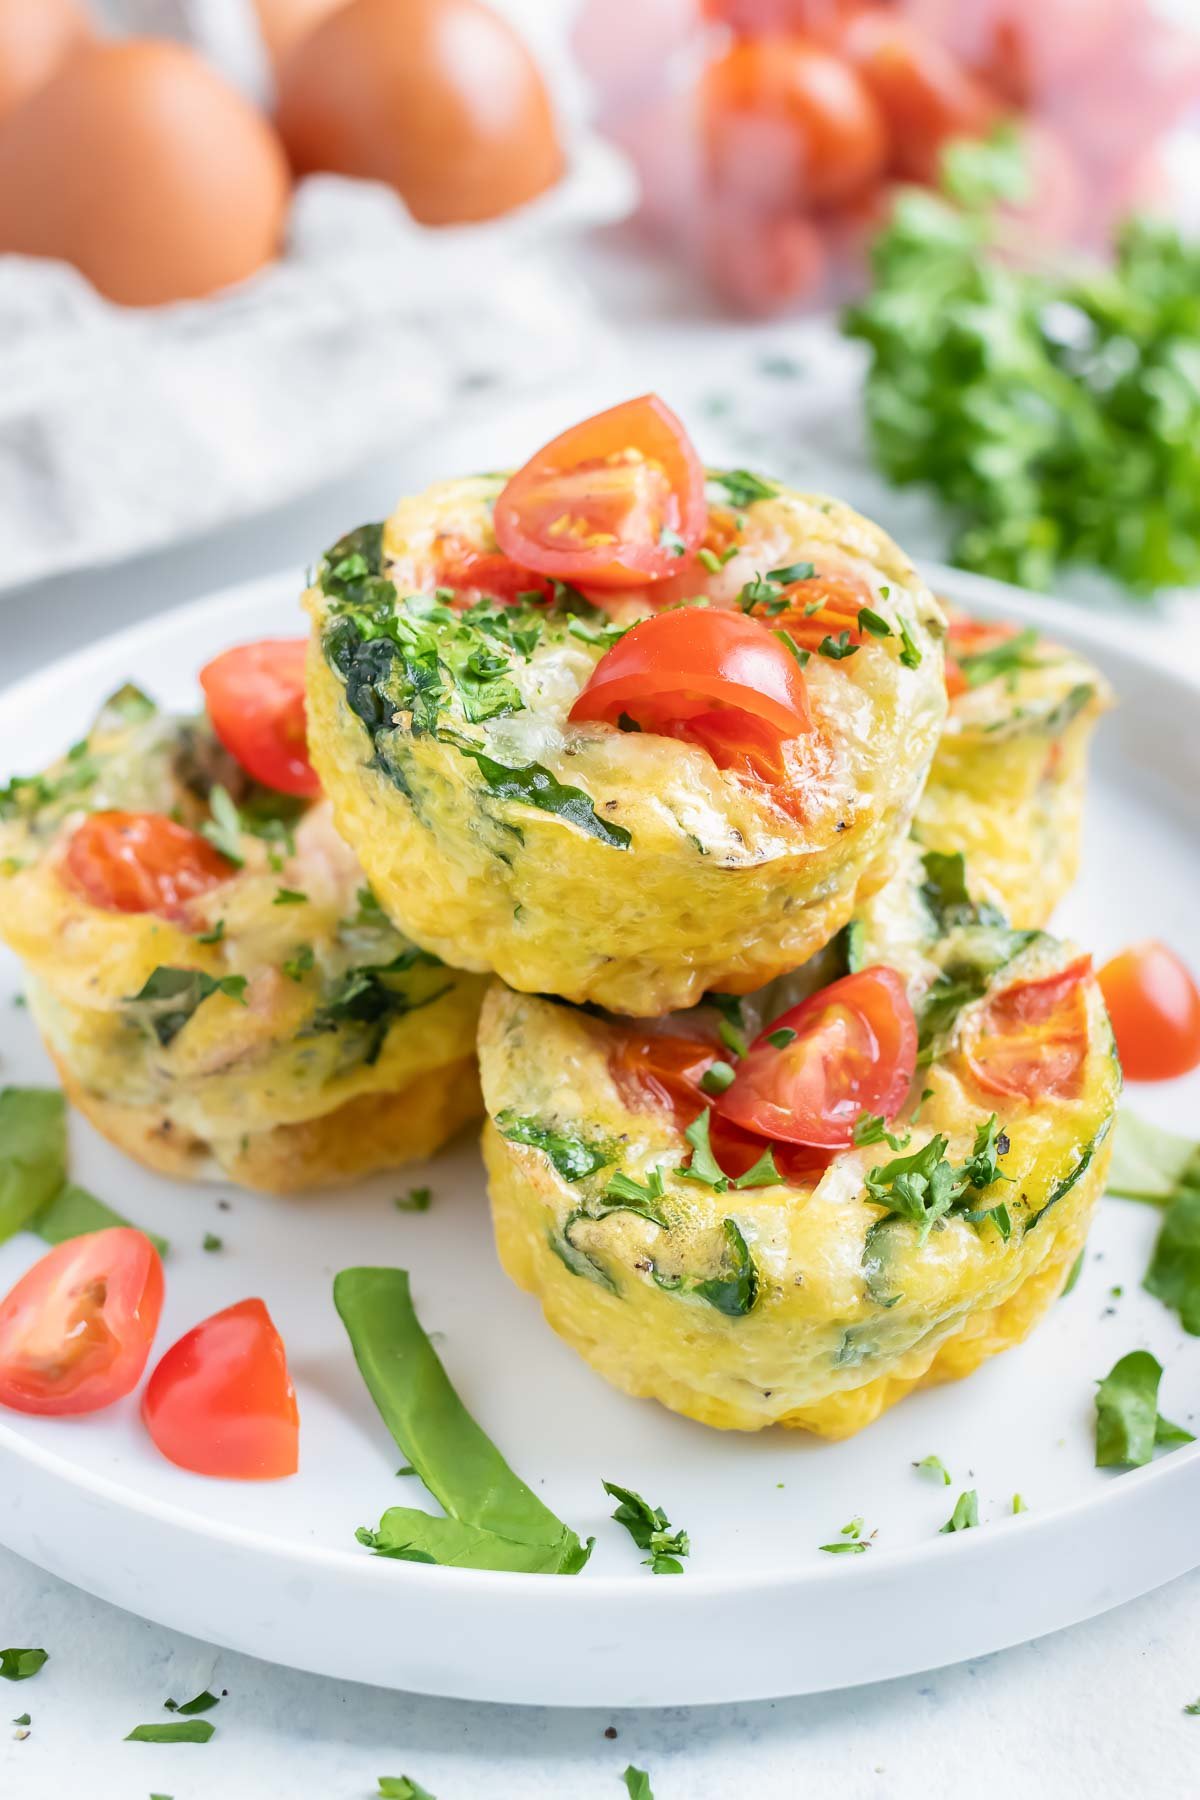 A pile of four egg muffins are served on a white plate.